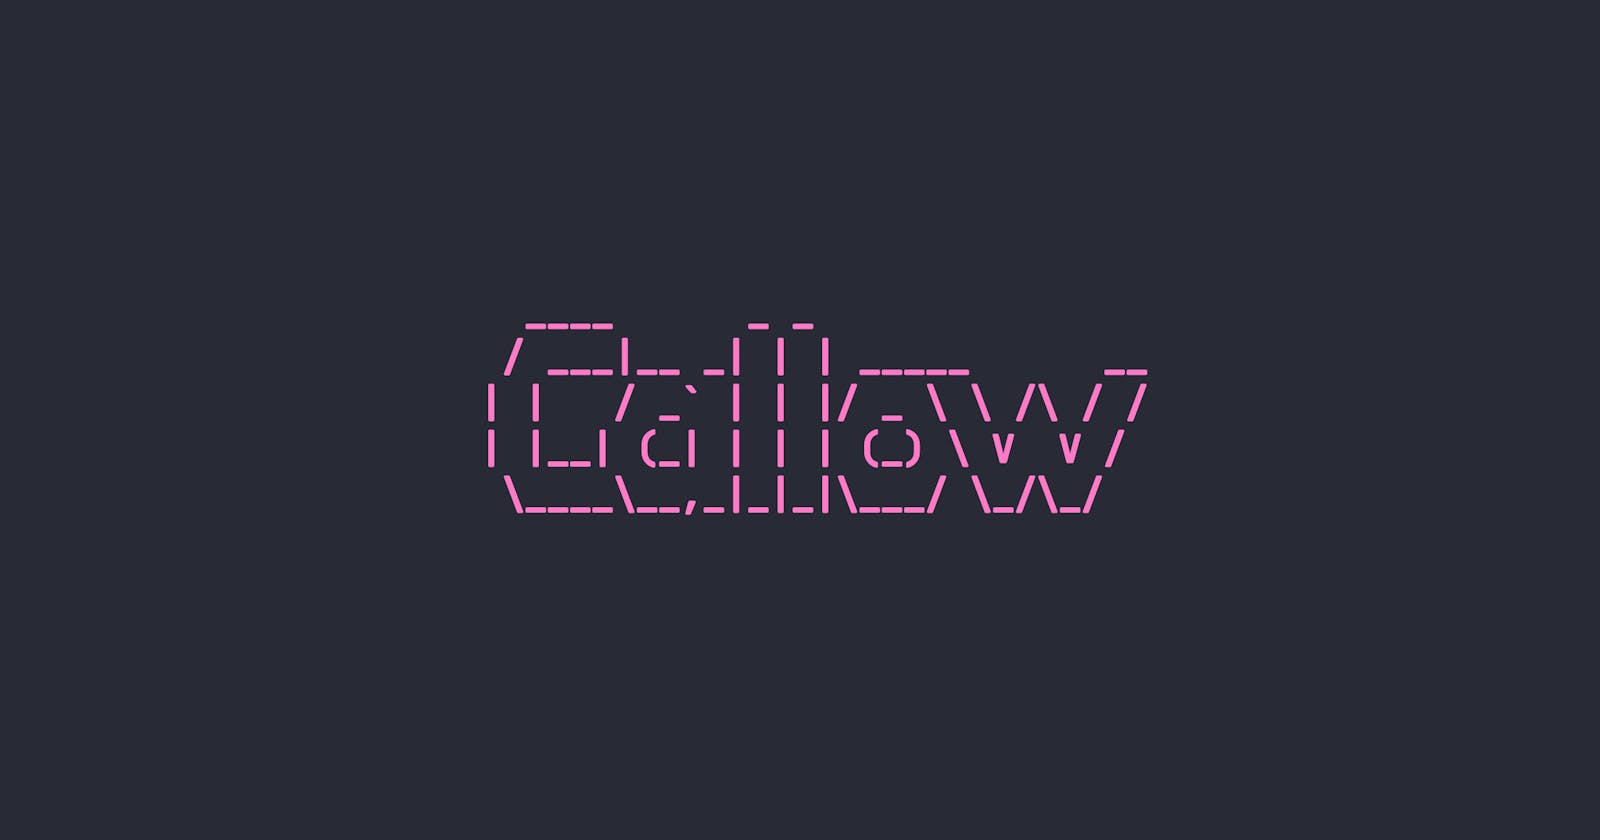 Brute-forcing websites with Callow